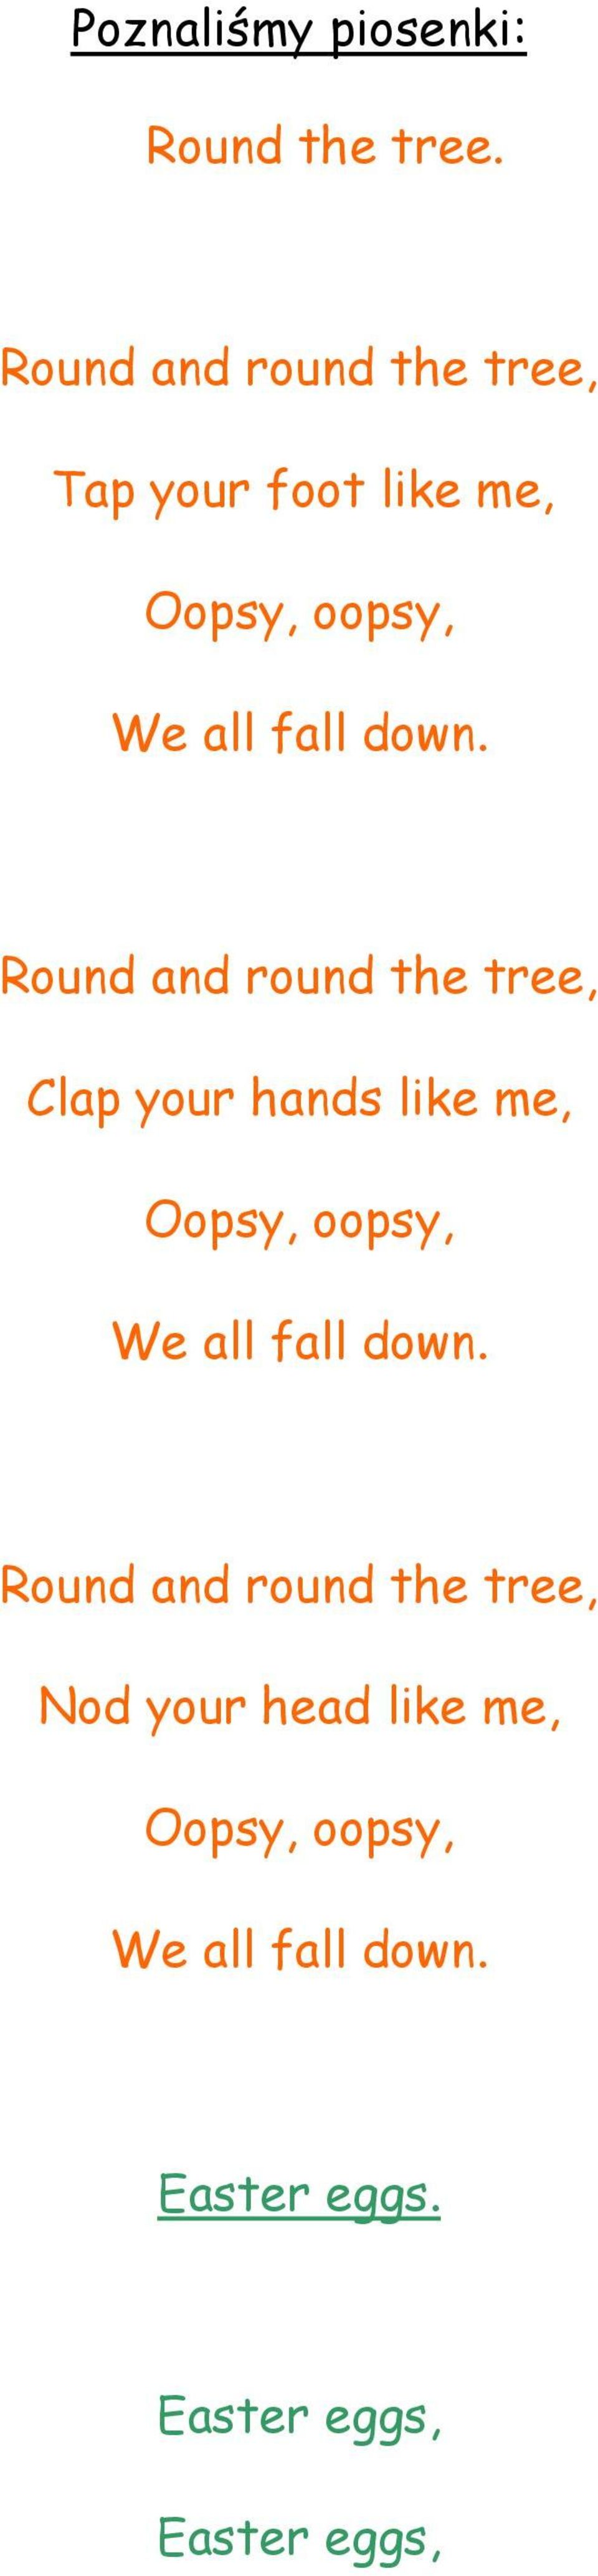 Round and round the tree, Clap your hands like me, Oopsy, oopsy, We all fall